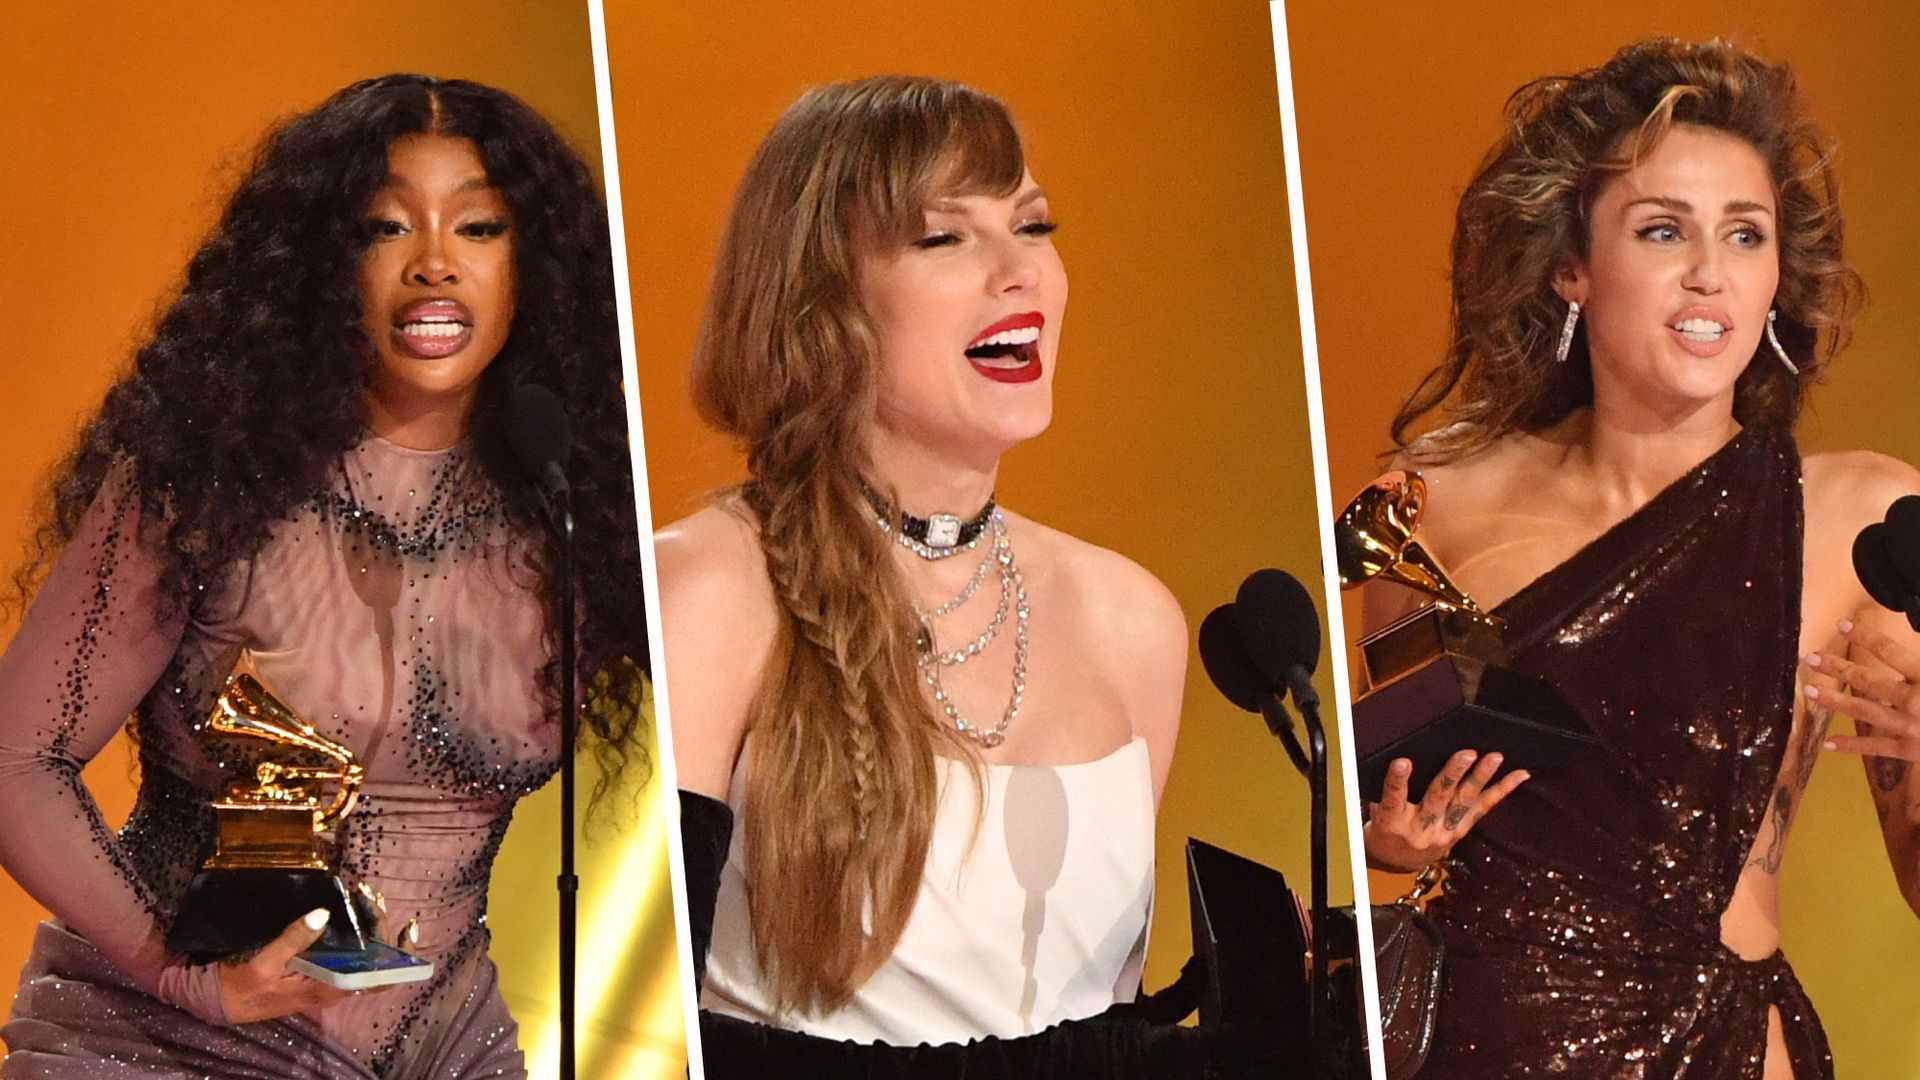 Taylor Swift makes Grammys history with fourth Album of the Year win as Miley Cyrus and SZA win big